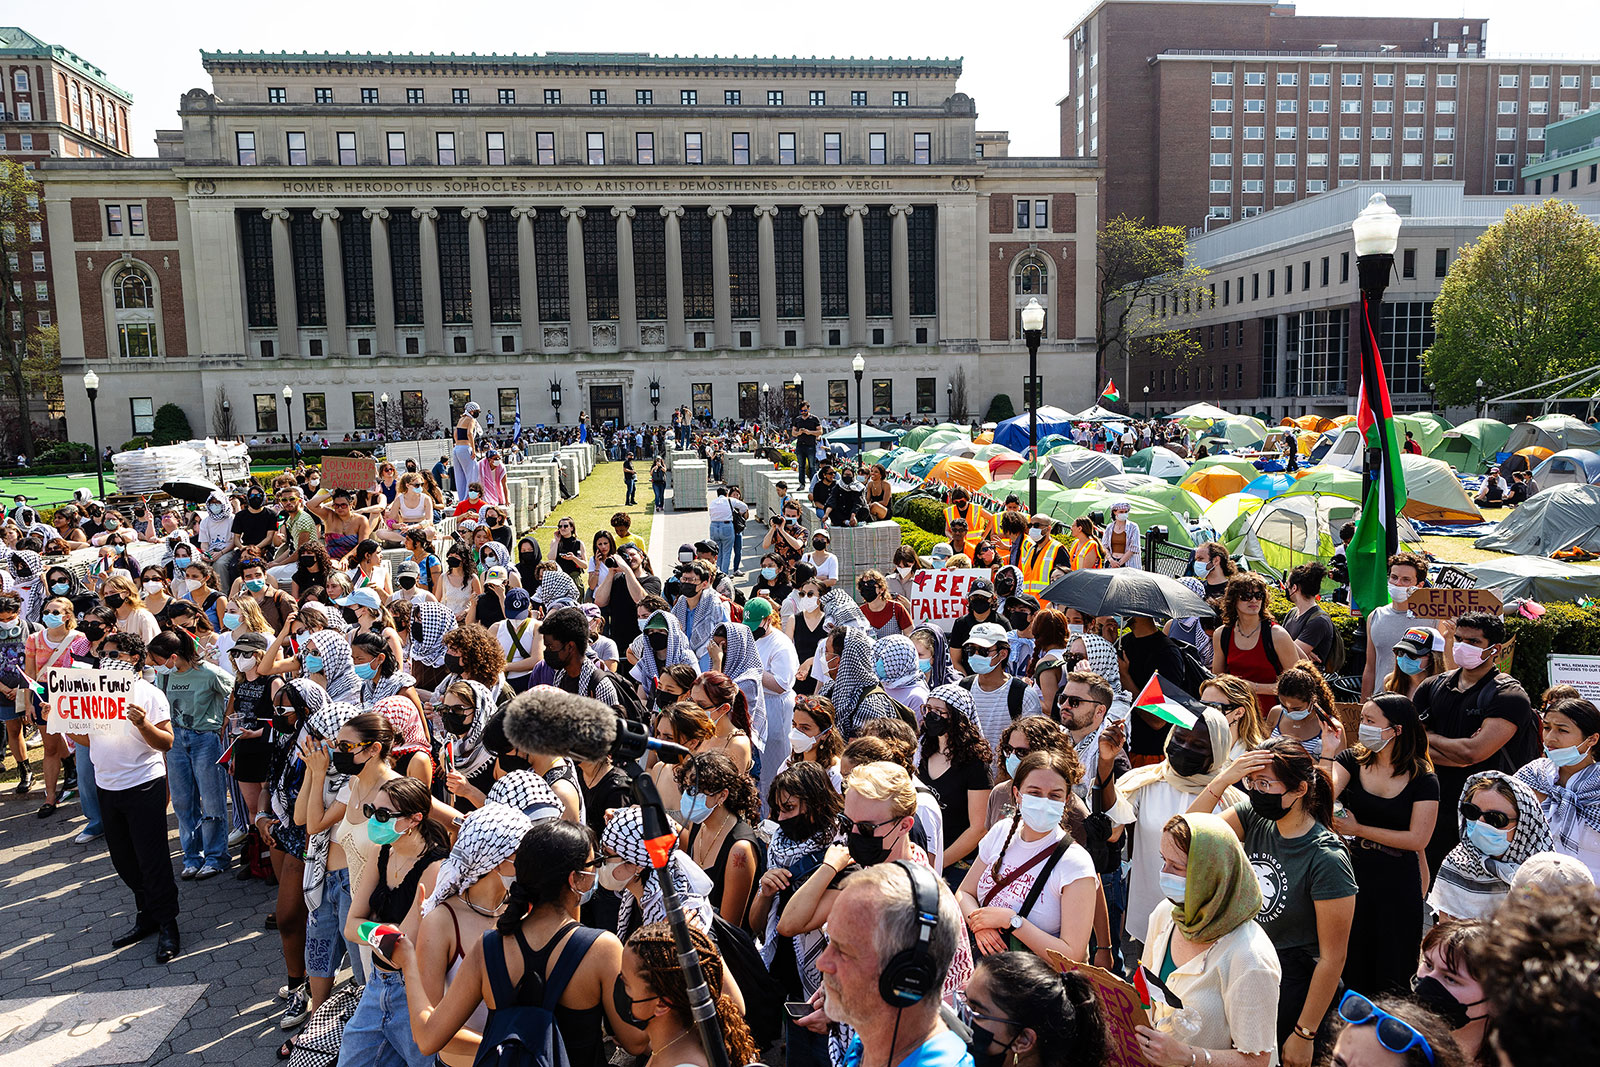 Pro-Palestinian demonstrators hold a short rally after marching around the "Gaza Solidarity Encampment" in the West Lawn of Columbia University on Monday, April 29, in New York.